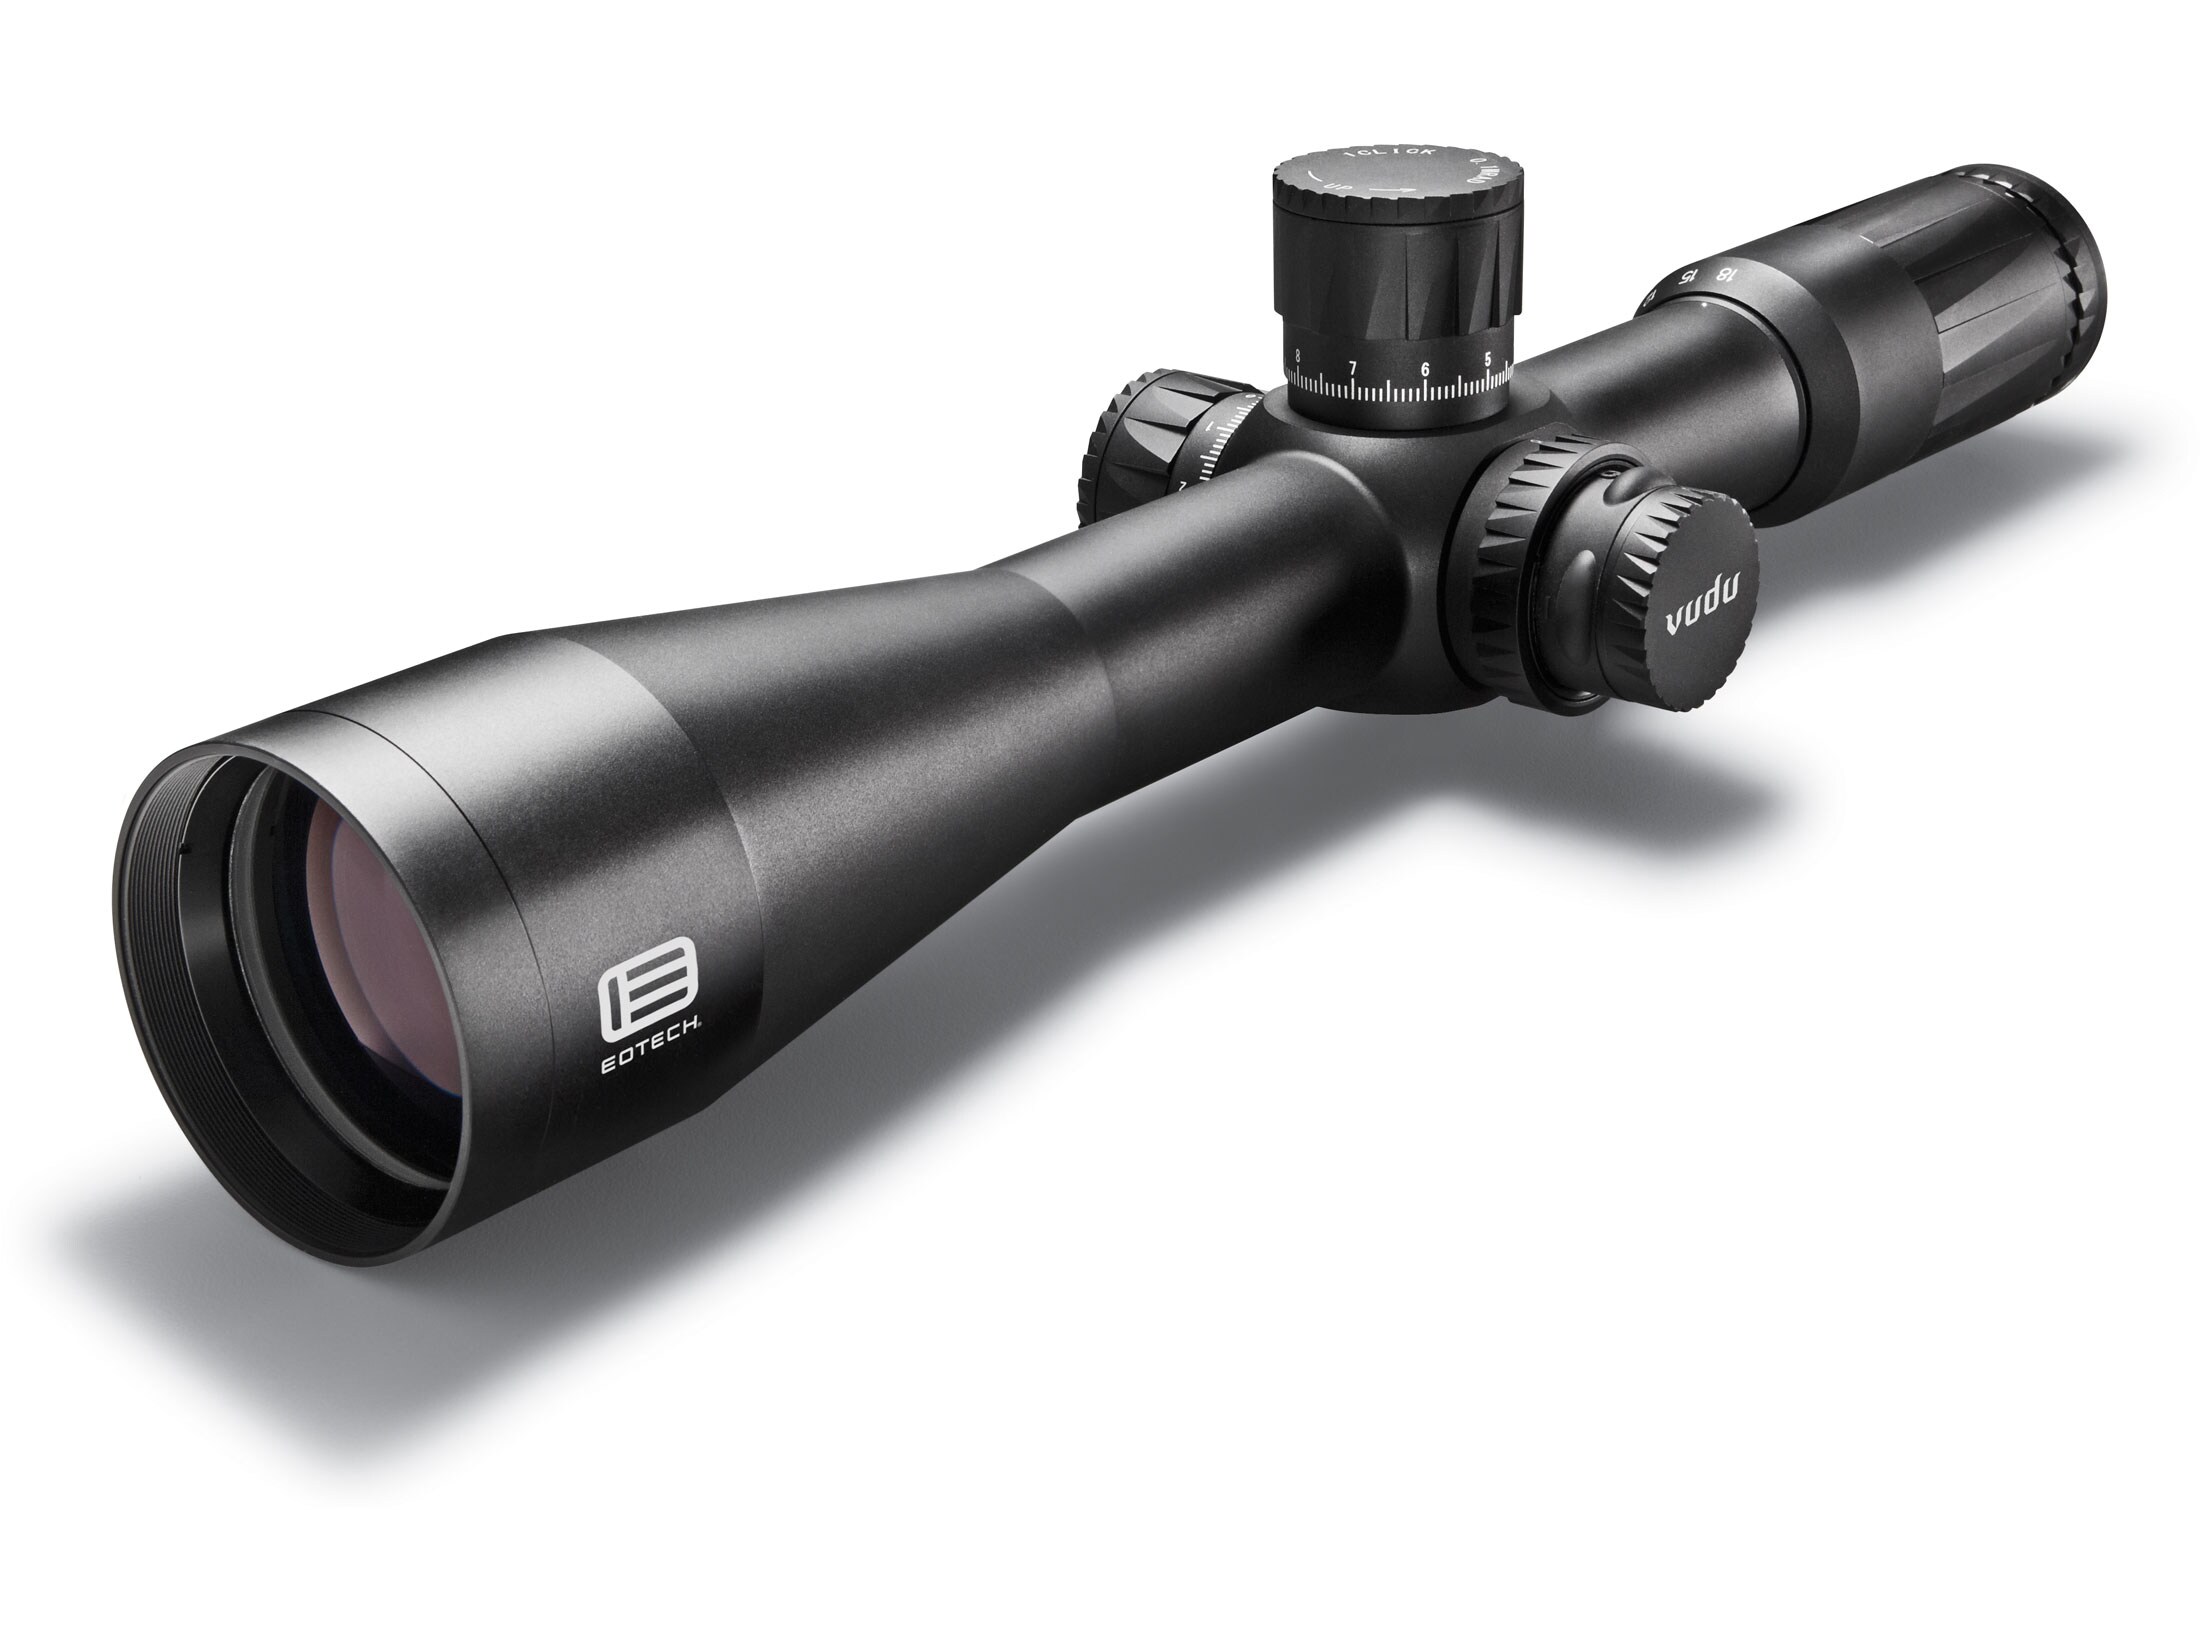 EOTech Vudu Rifle Scope 34mm Tube 3.5-18x 50mm 1/10 Mil Adjustments Side Focus First Focal EZ Check Zero Stop Illuminated Reticle Black For Sale